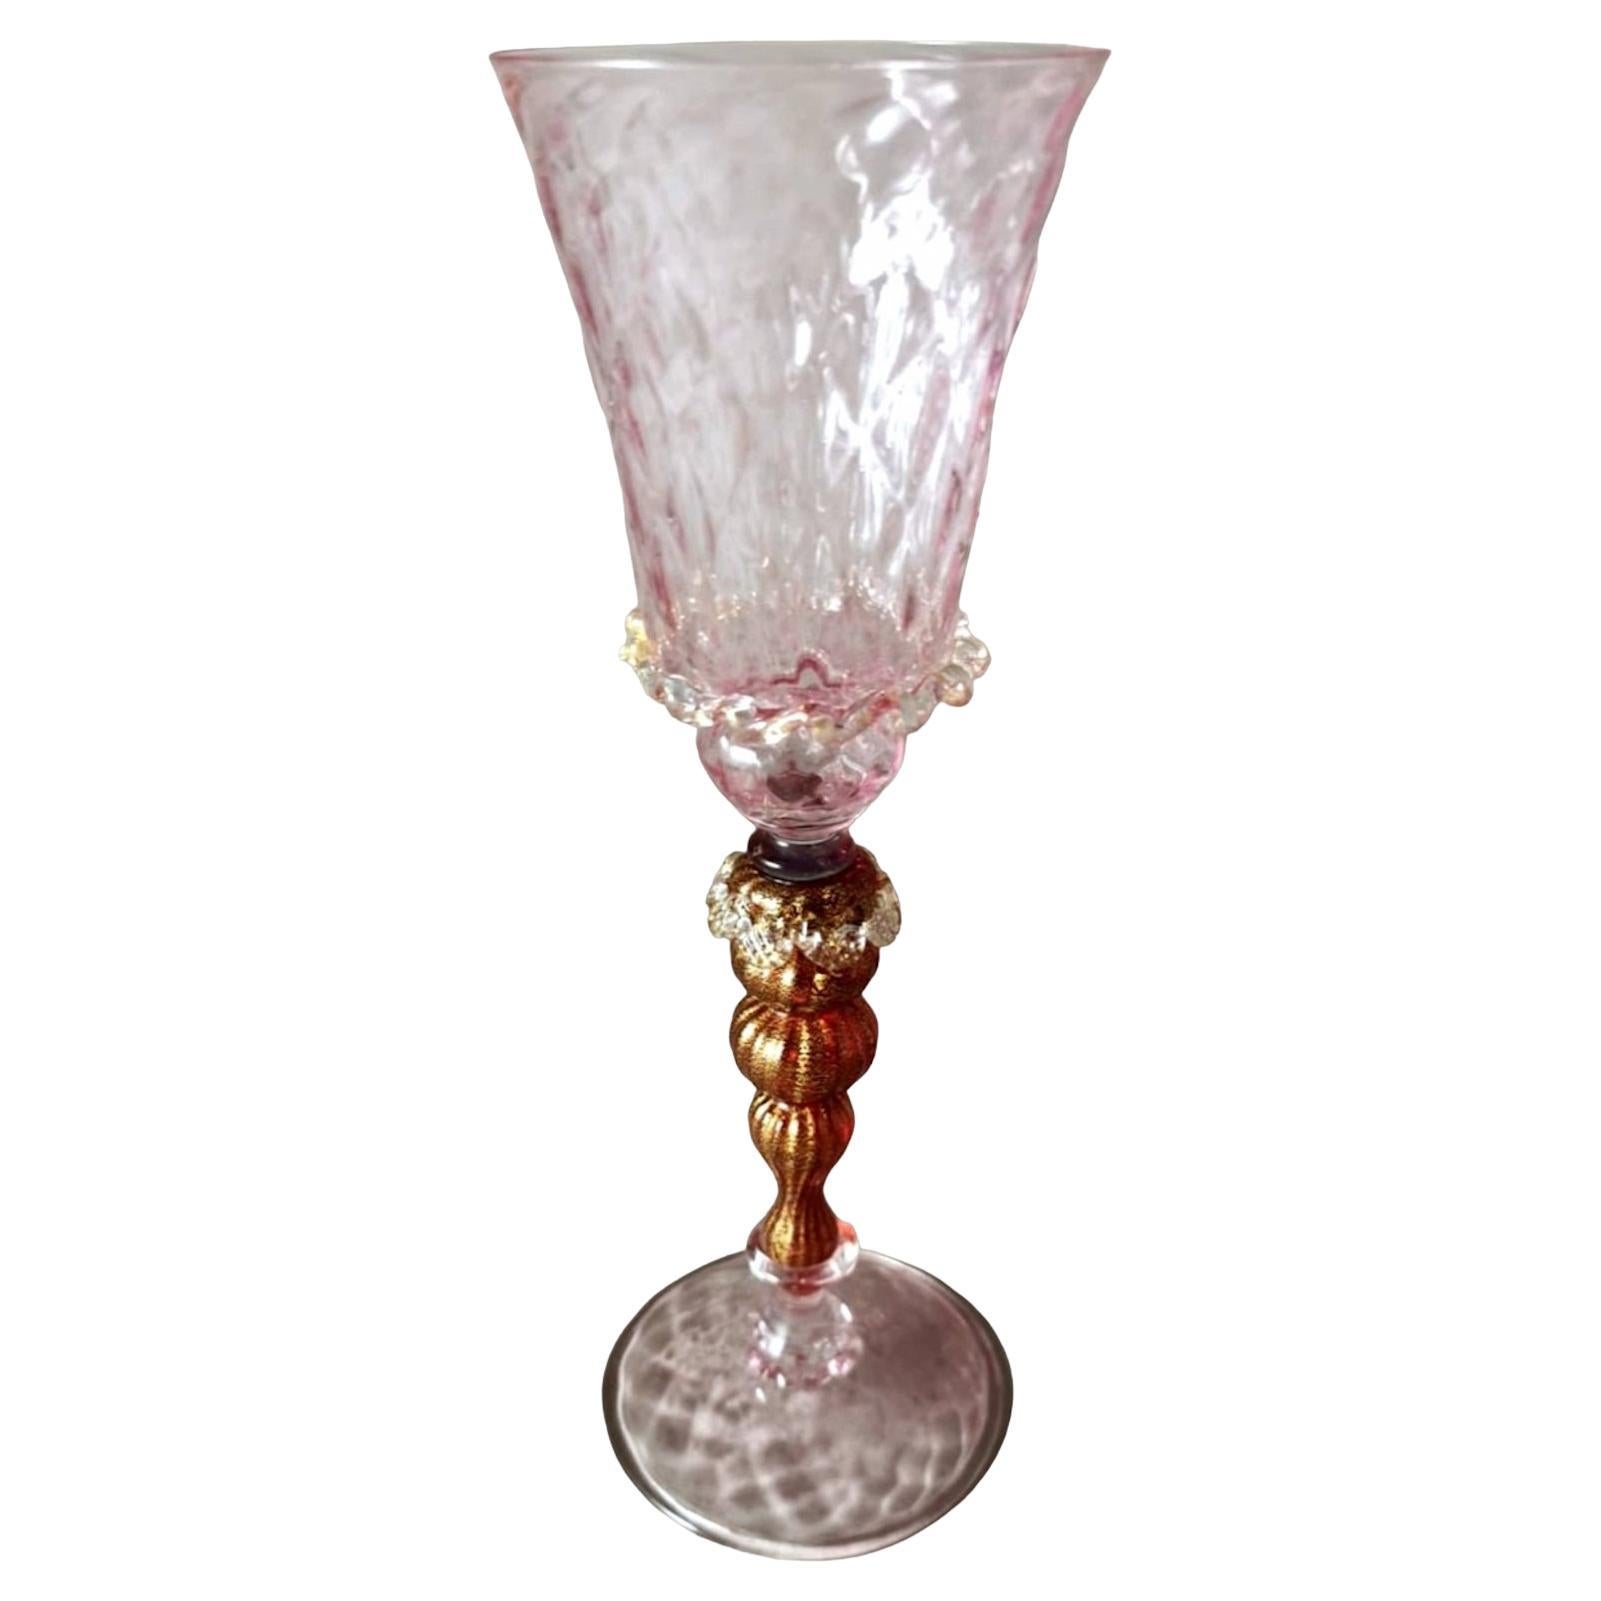 Murano Glass Goblet "Tipetto" Pink Blown Glass With Gold Leaf Decoration